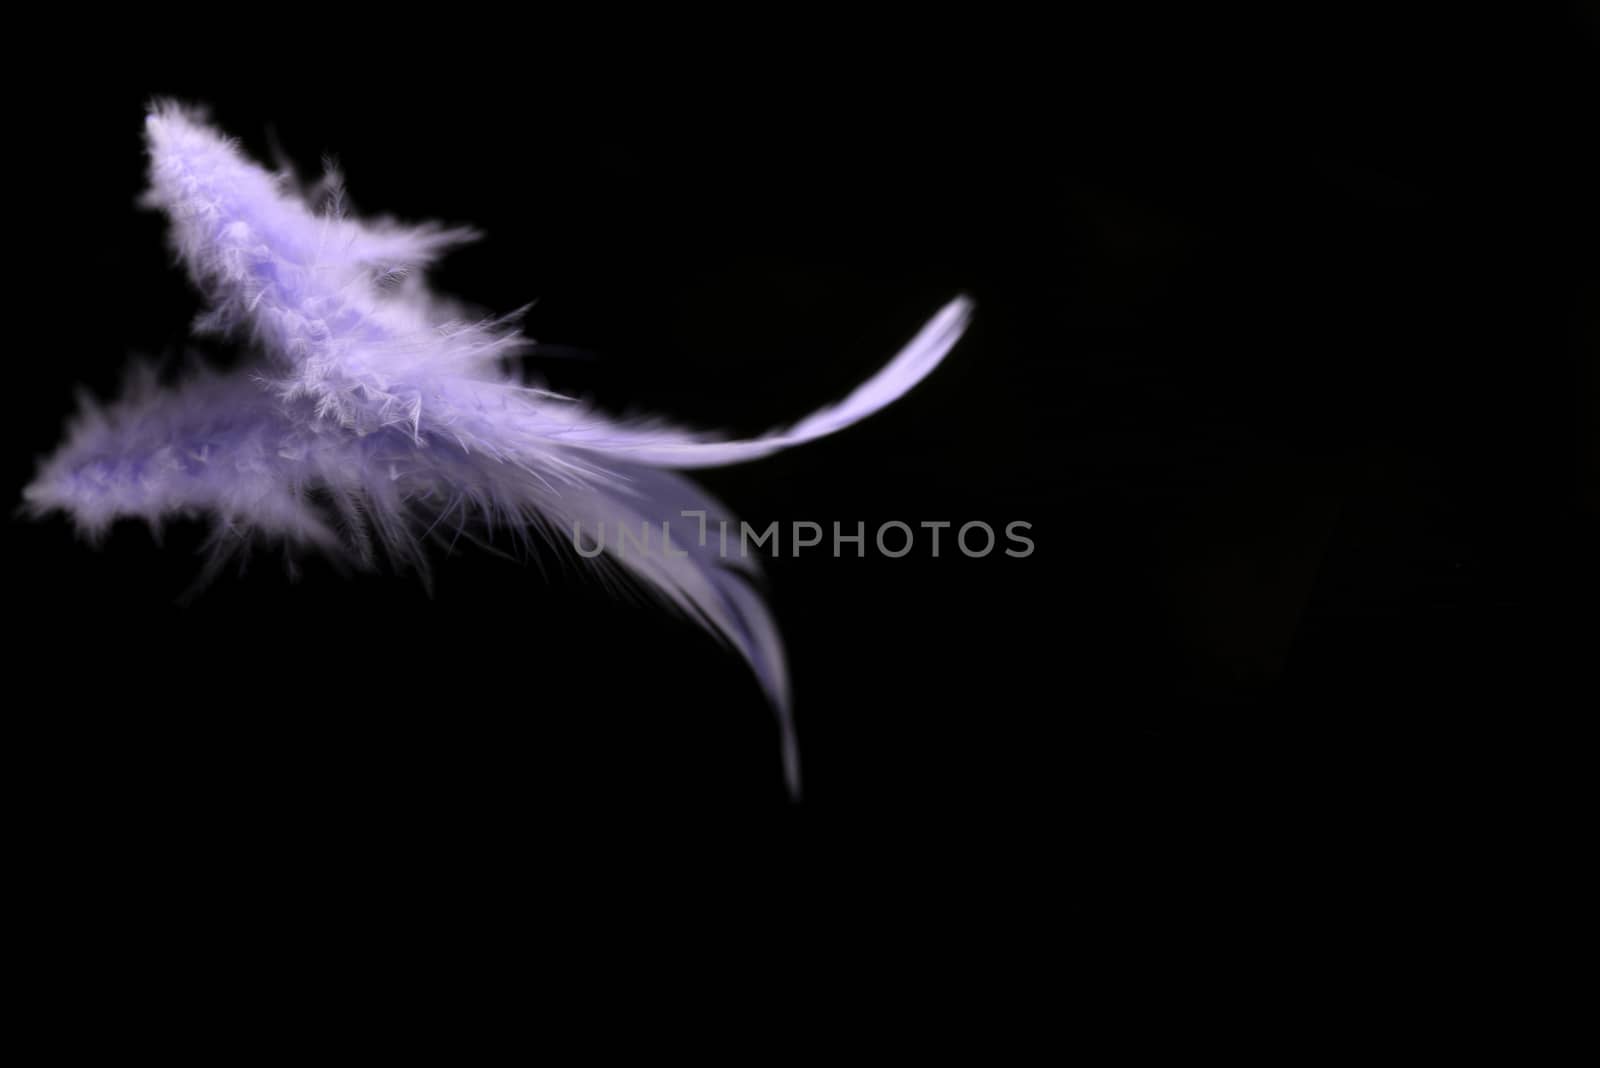 Abstract blurred violet feather over black background